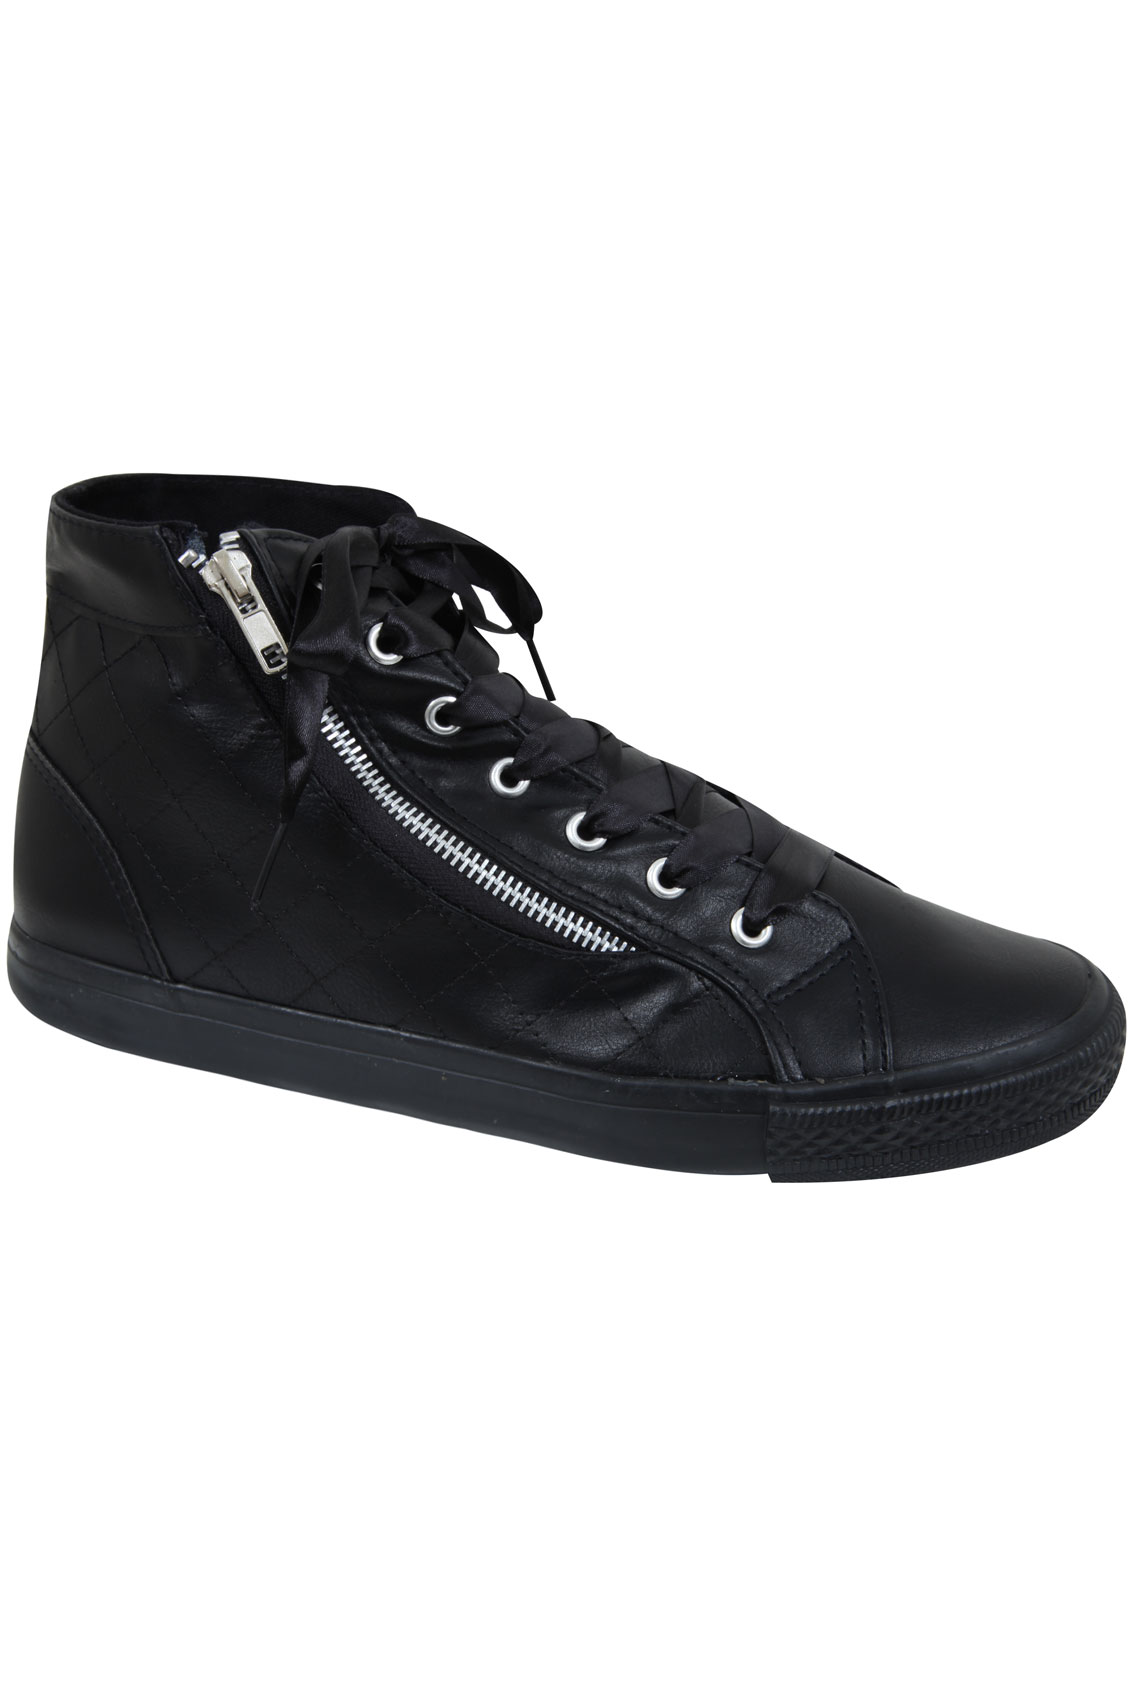 Black Faux Leather Ribbon Lace Hi Top Trainers In EEE Fit